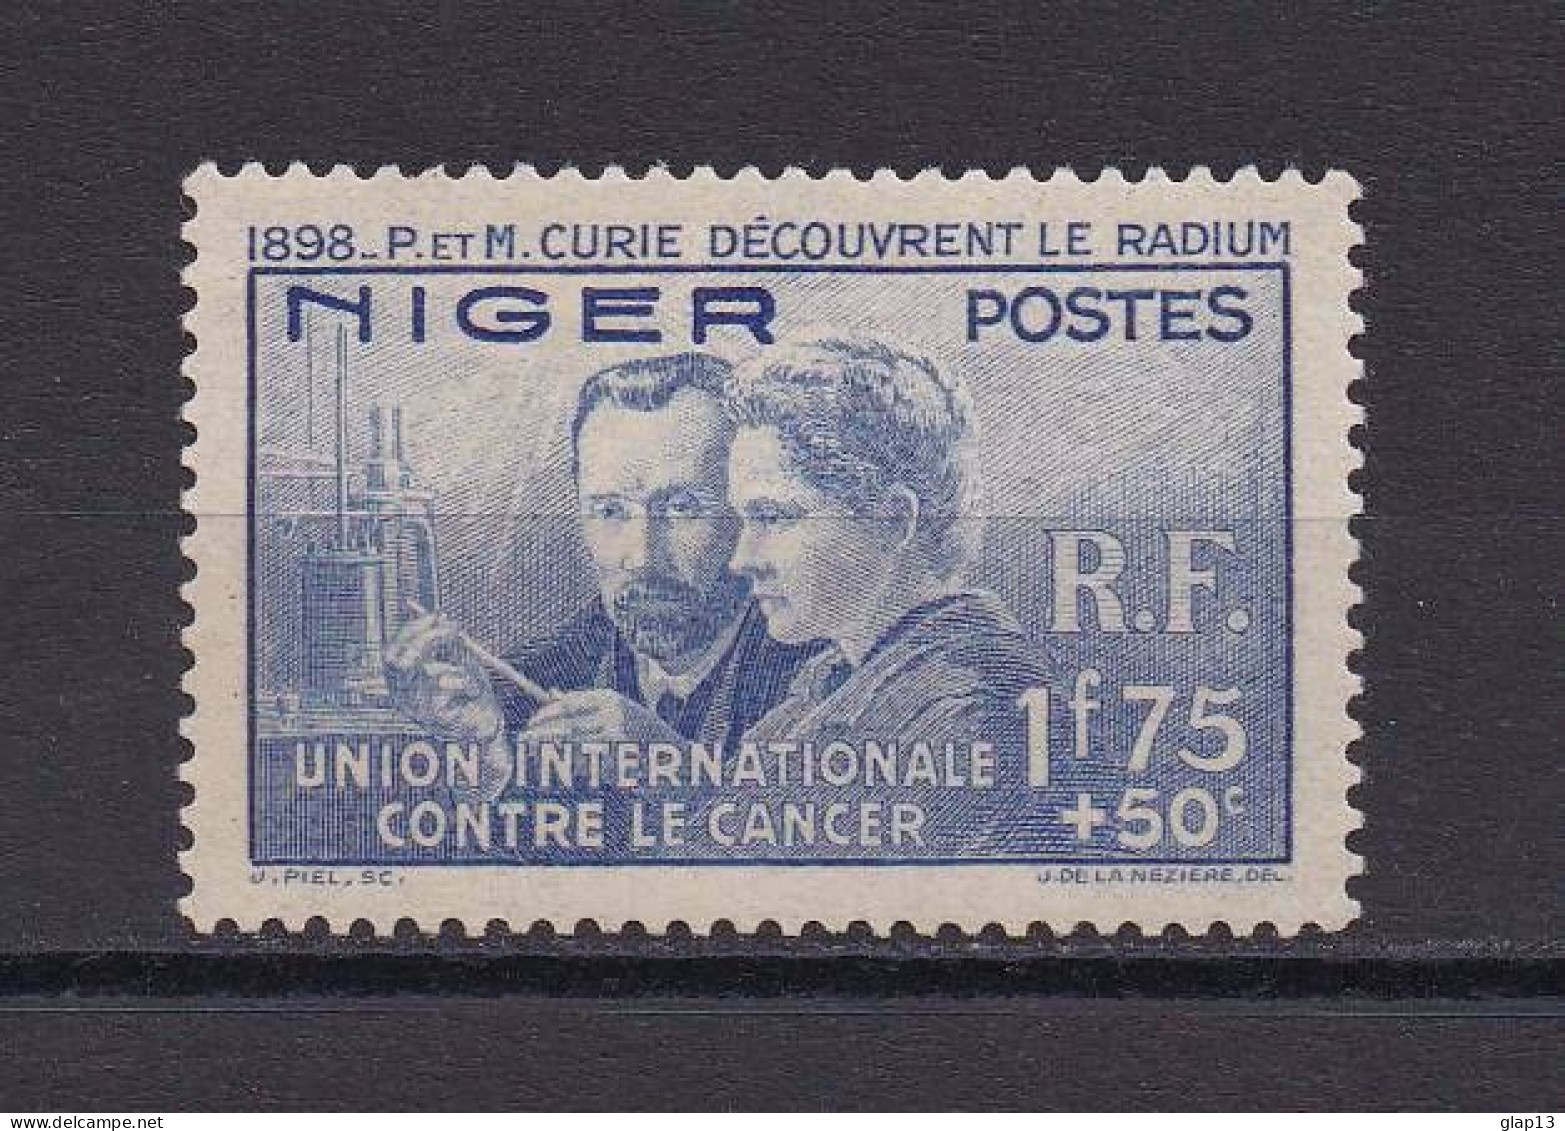 NIGER 1938 TIMBRE N°63 NEUF** PIERRE ET MARIE CURIE - Nuovi